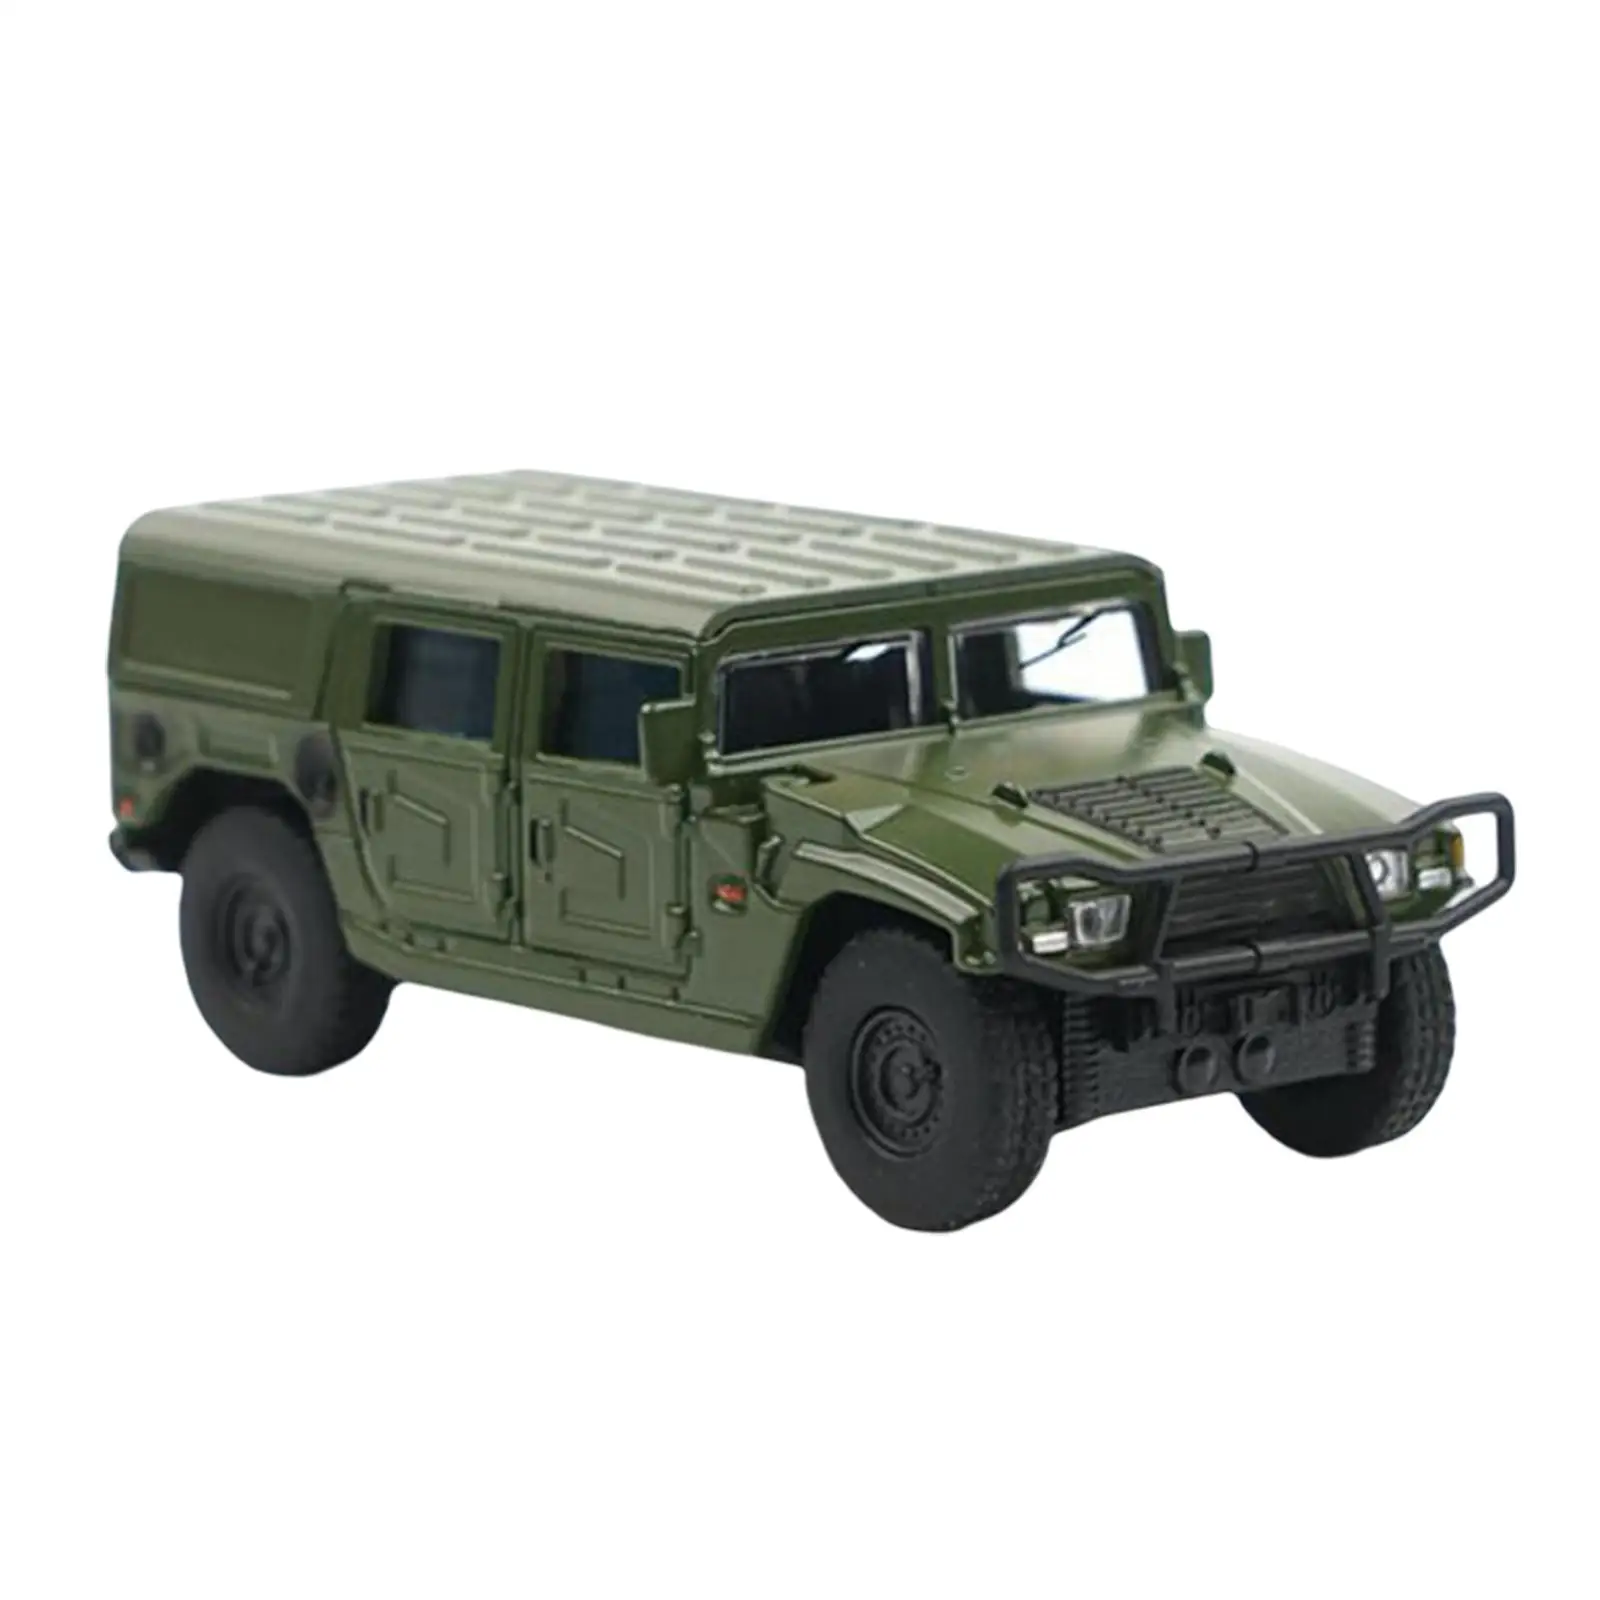 1/64 Car Model Figure Sand Table Ornament Mini Vehicles Toys for Photography Props Diorama Scenery Landscape Layout Accessories